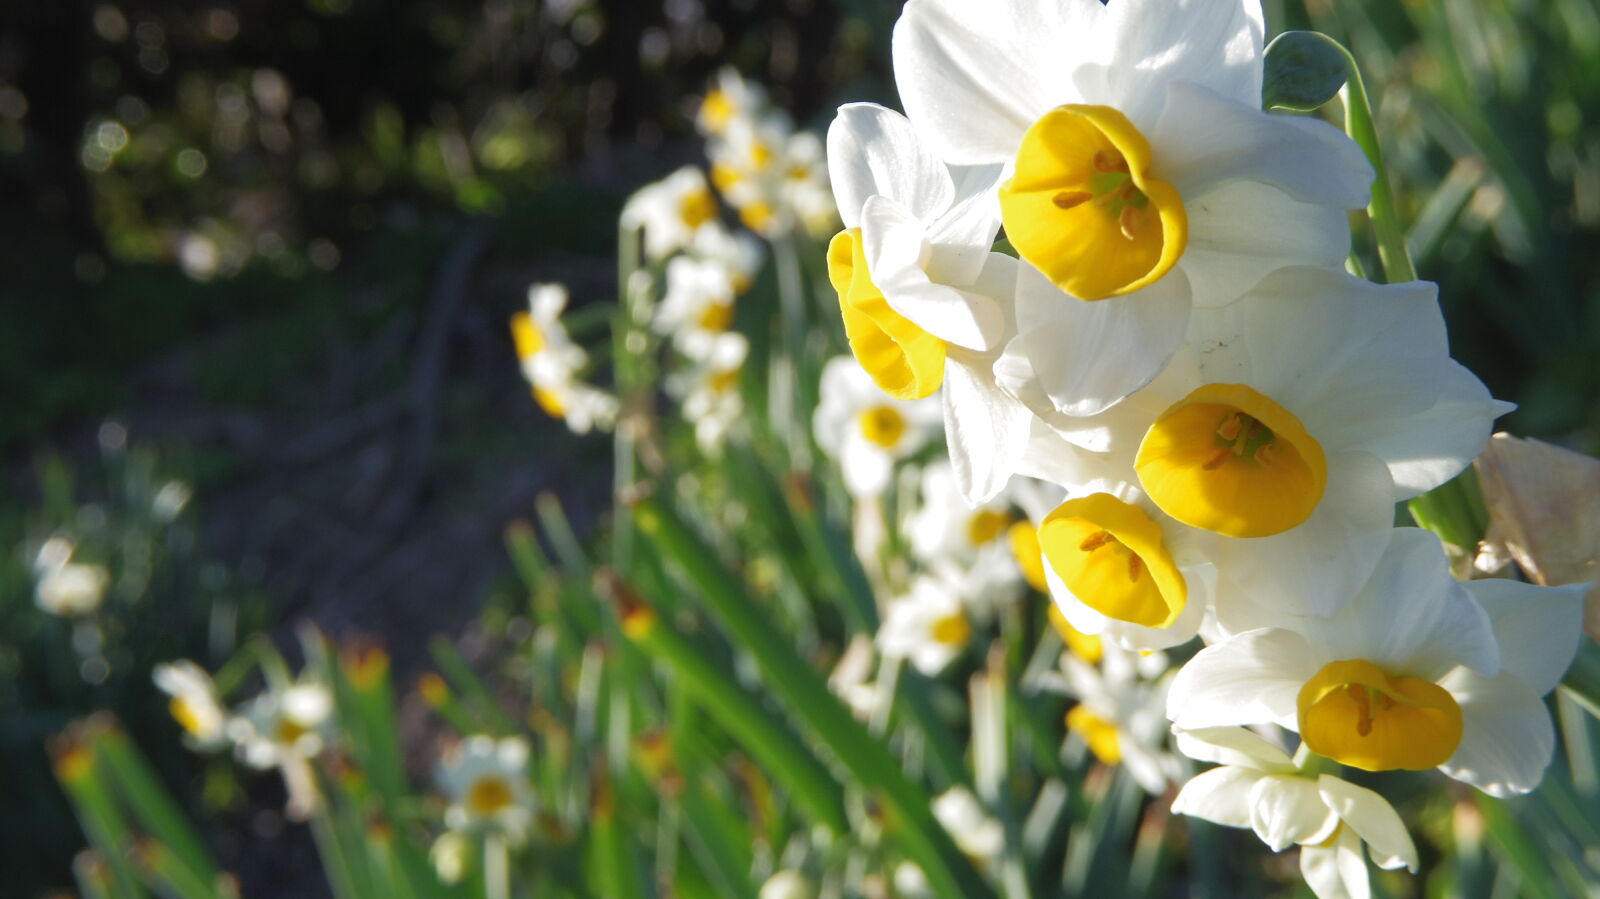 Pentax 02 Standard Zoom sample photo. Daffodils, gold, green, white photography